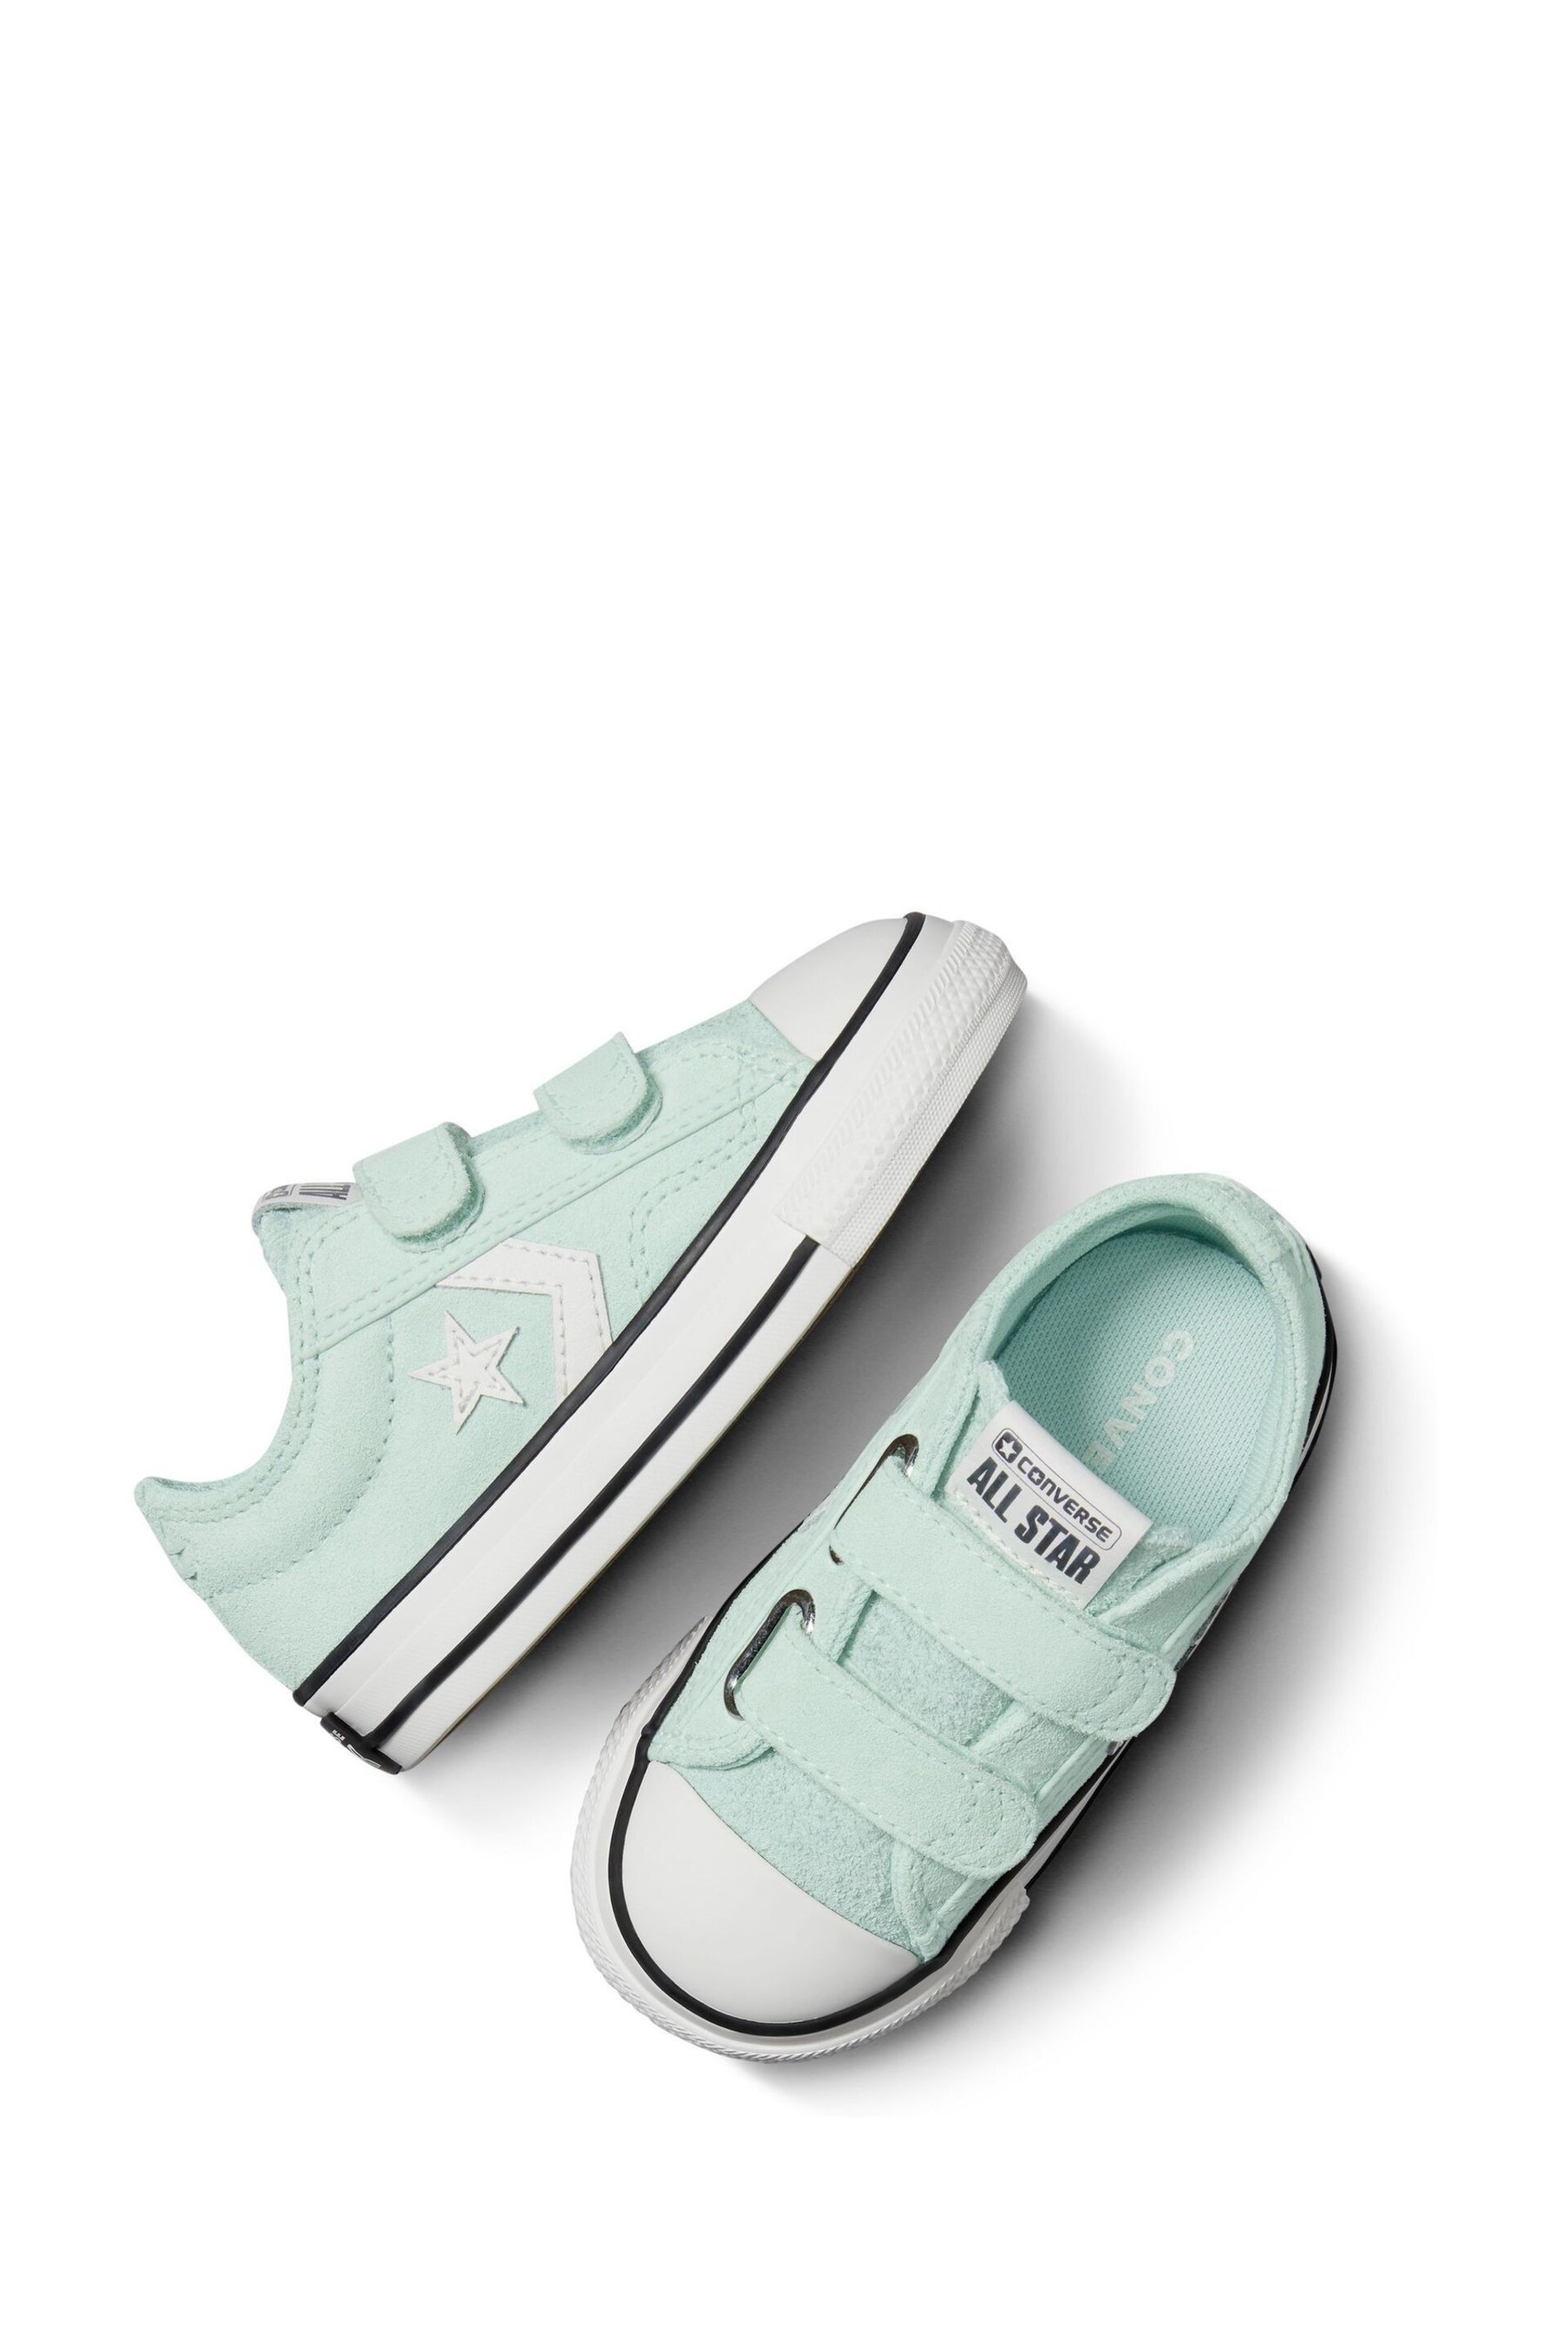 Converse Green Star Player 76 2V Ox Trainers - Image 6 of 9